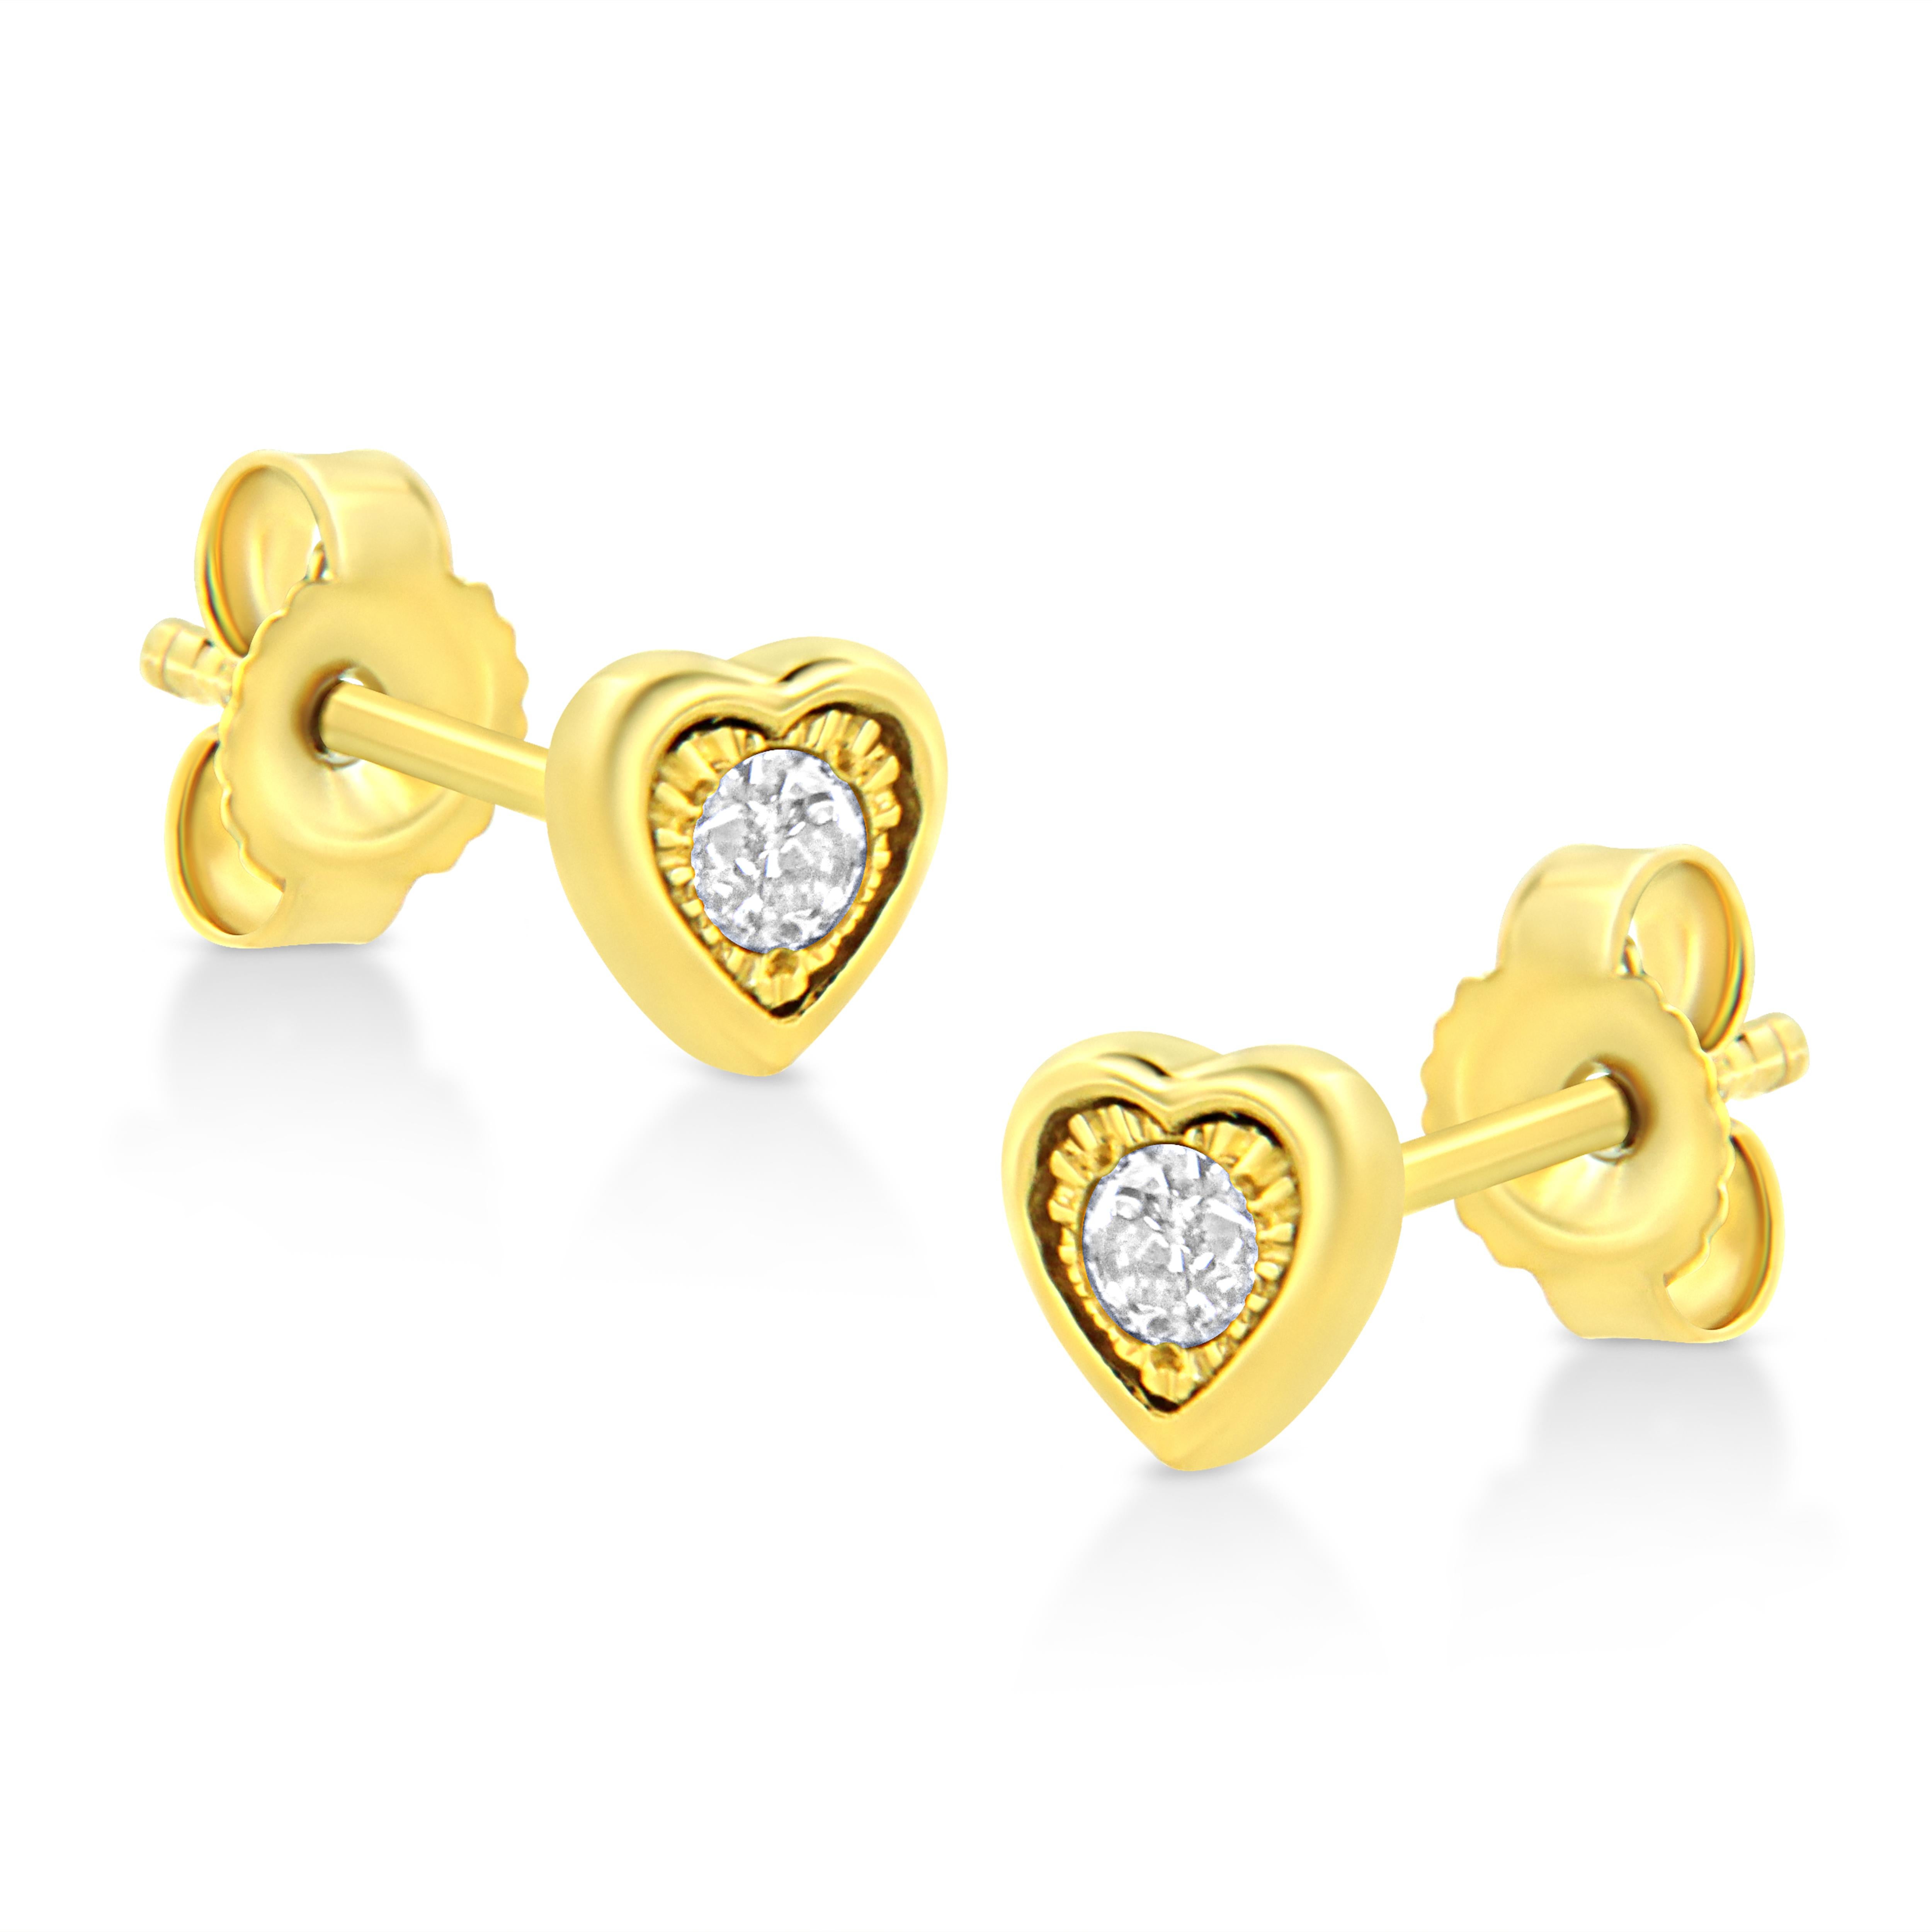 These heart shaped stud earrings are crafted in 10k yellow gold plated sterling silver and feature 1/10ct TDW of diamonds. Each earring features a single sparkling round cut diamond in a miracle setting that adds to the earrings sparkle. A polished